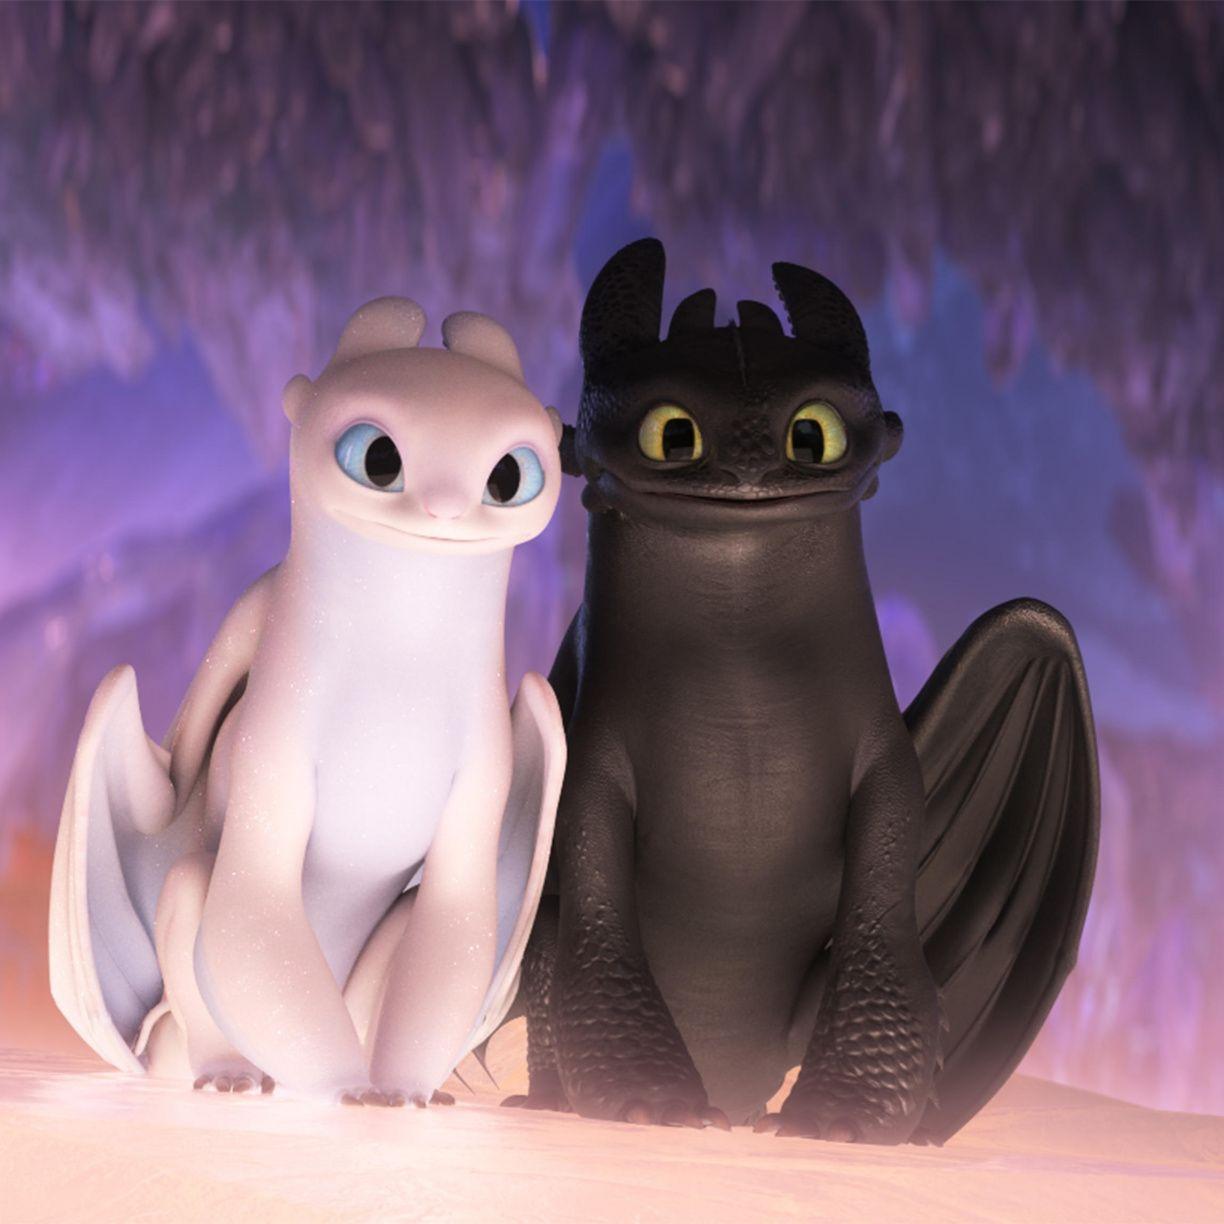 How To Train Your Dragon Homecoming Wallpapers - Wallpaper ...